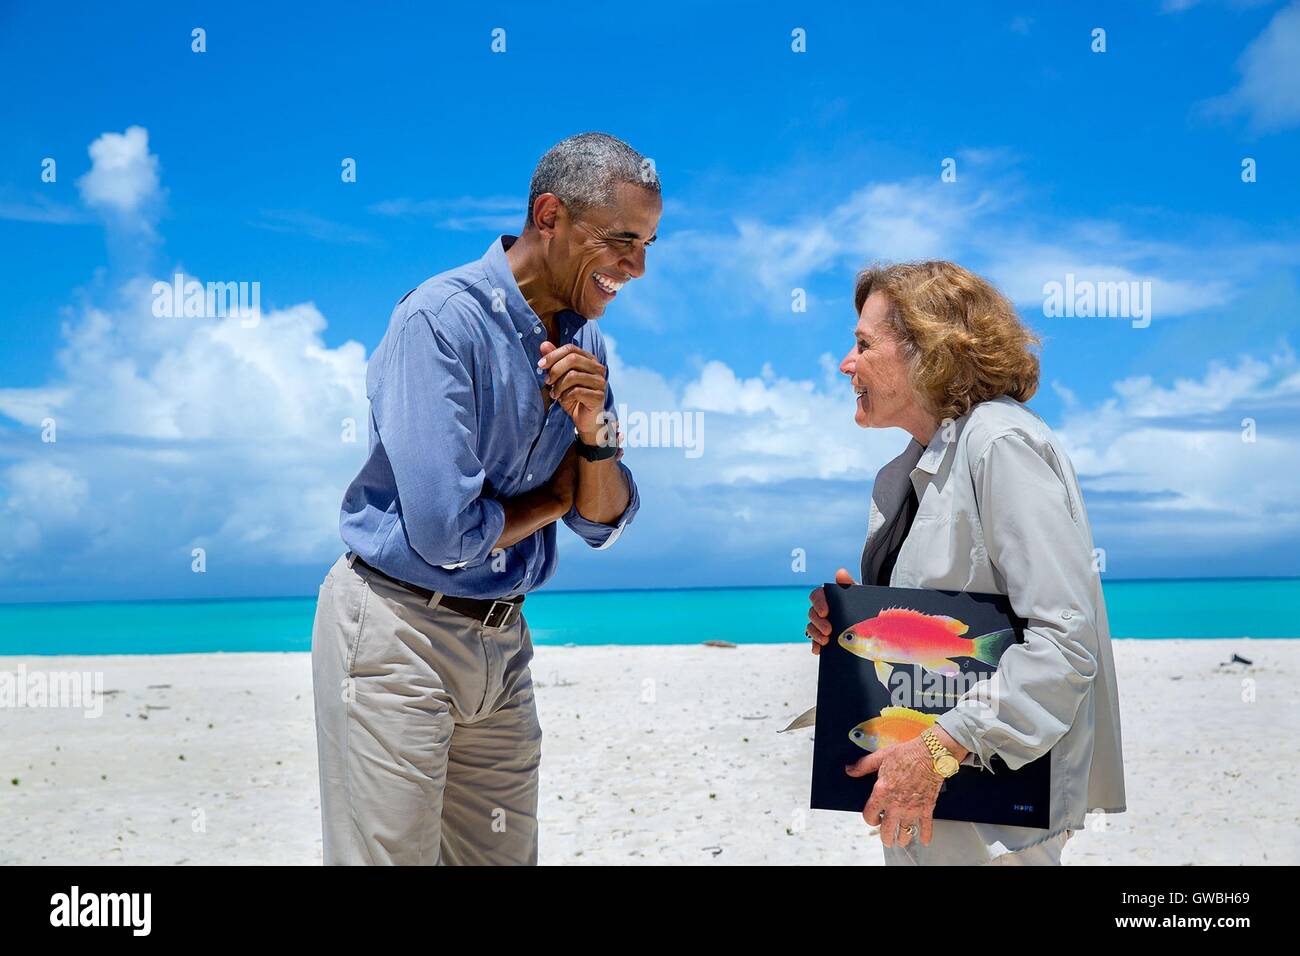 U.S President Barack Obama talks to oceanographer Dr. Sylvia Earle, National Geographic Society Explorer-in-Residence during a visit to Midway Atoll September 1, 2016 in the Papahanaumokuakea Marine National Monument, Northwestern Hawaiian Islands. Stock Photo